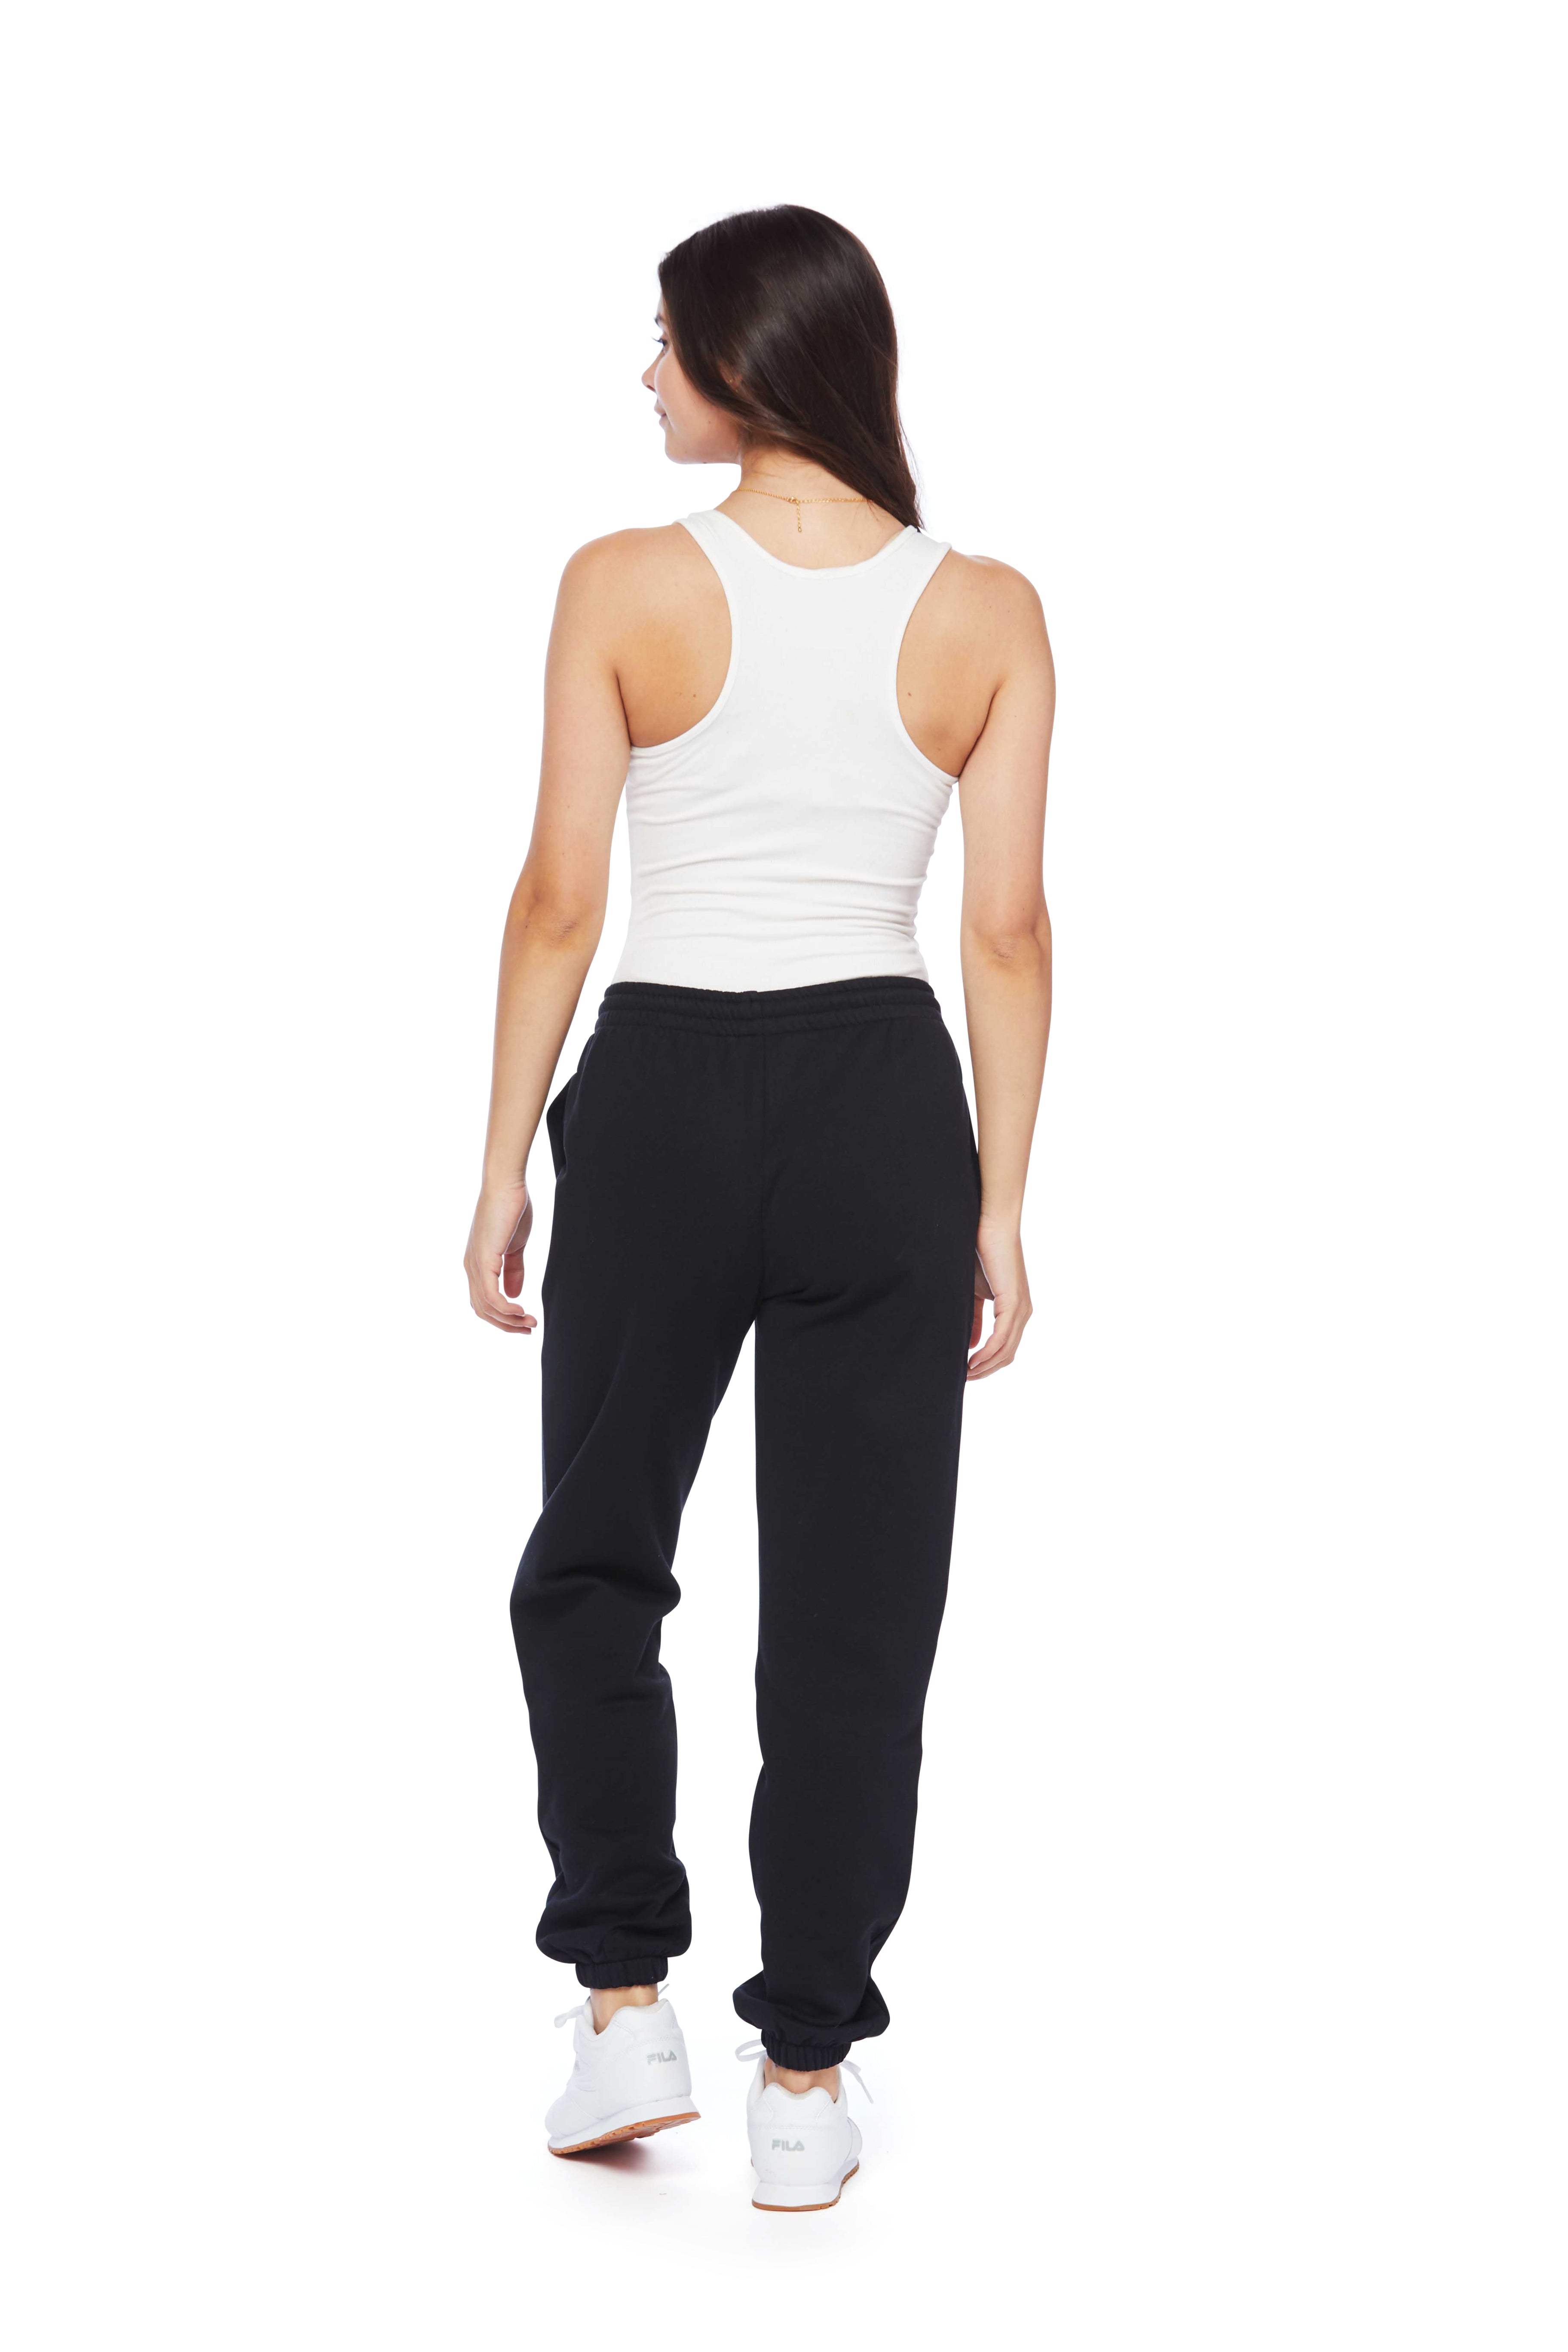 Customized Nova Boyfriend Jogger in Black from Lazypants - always a great buy at a reasonable price.